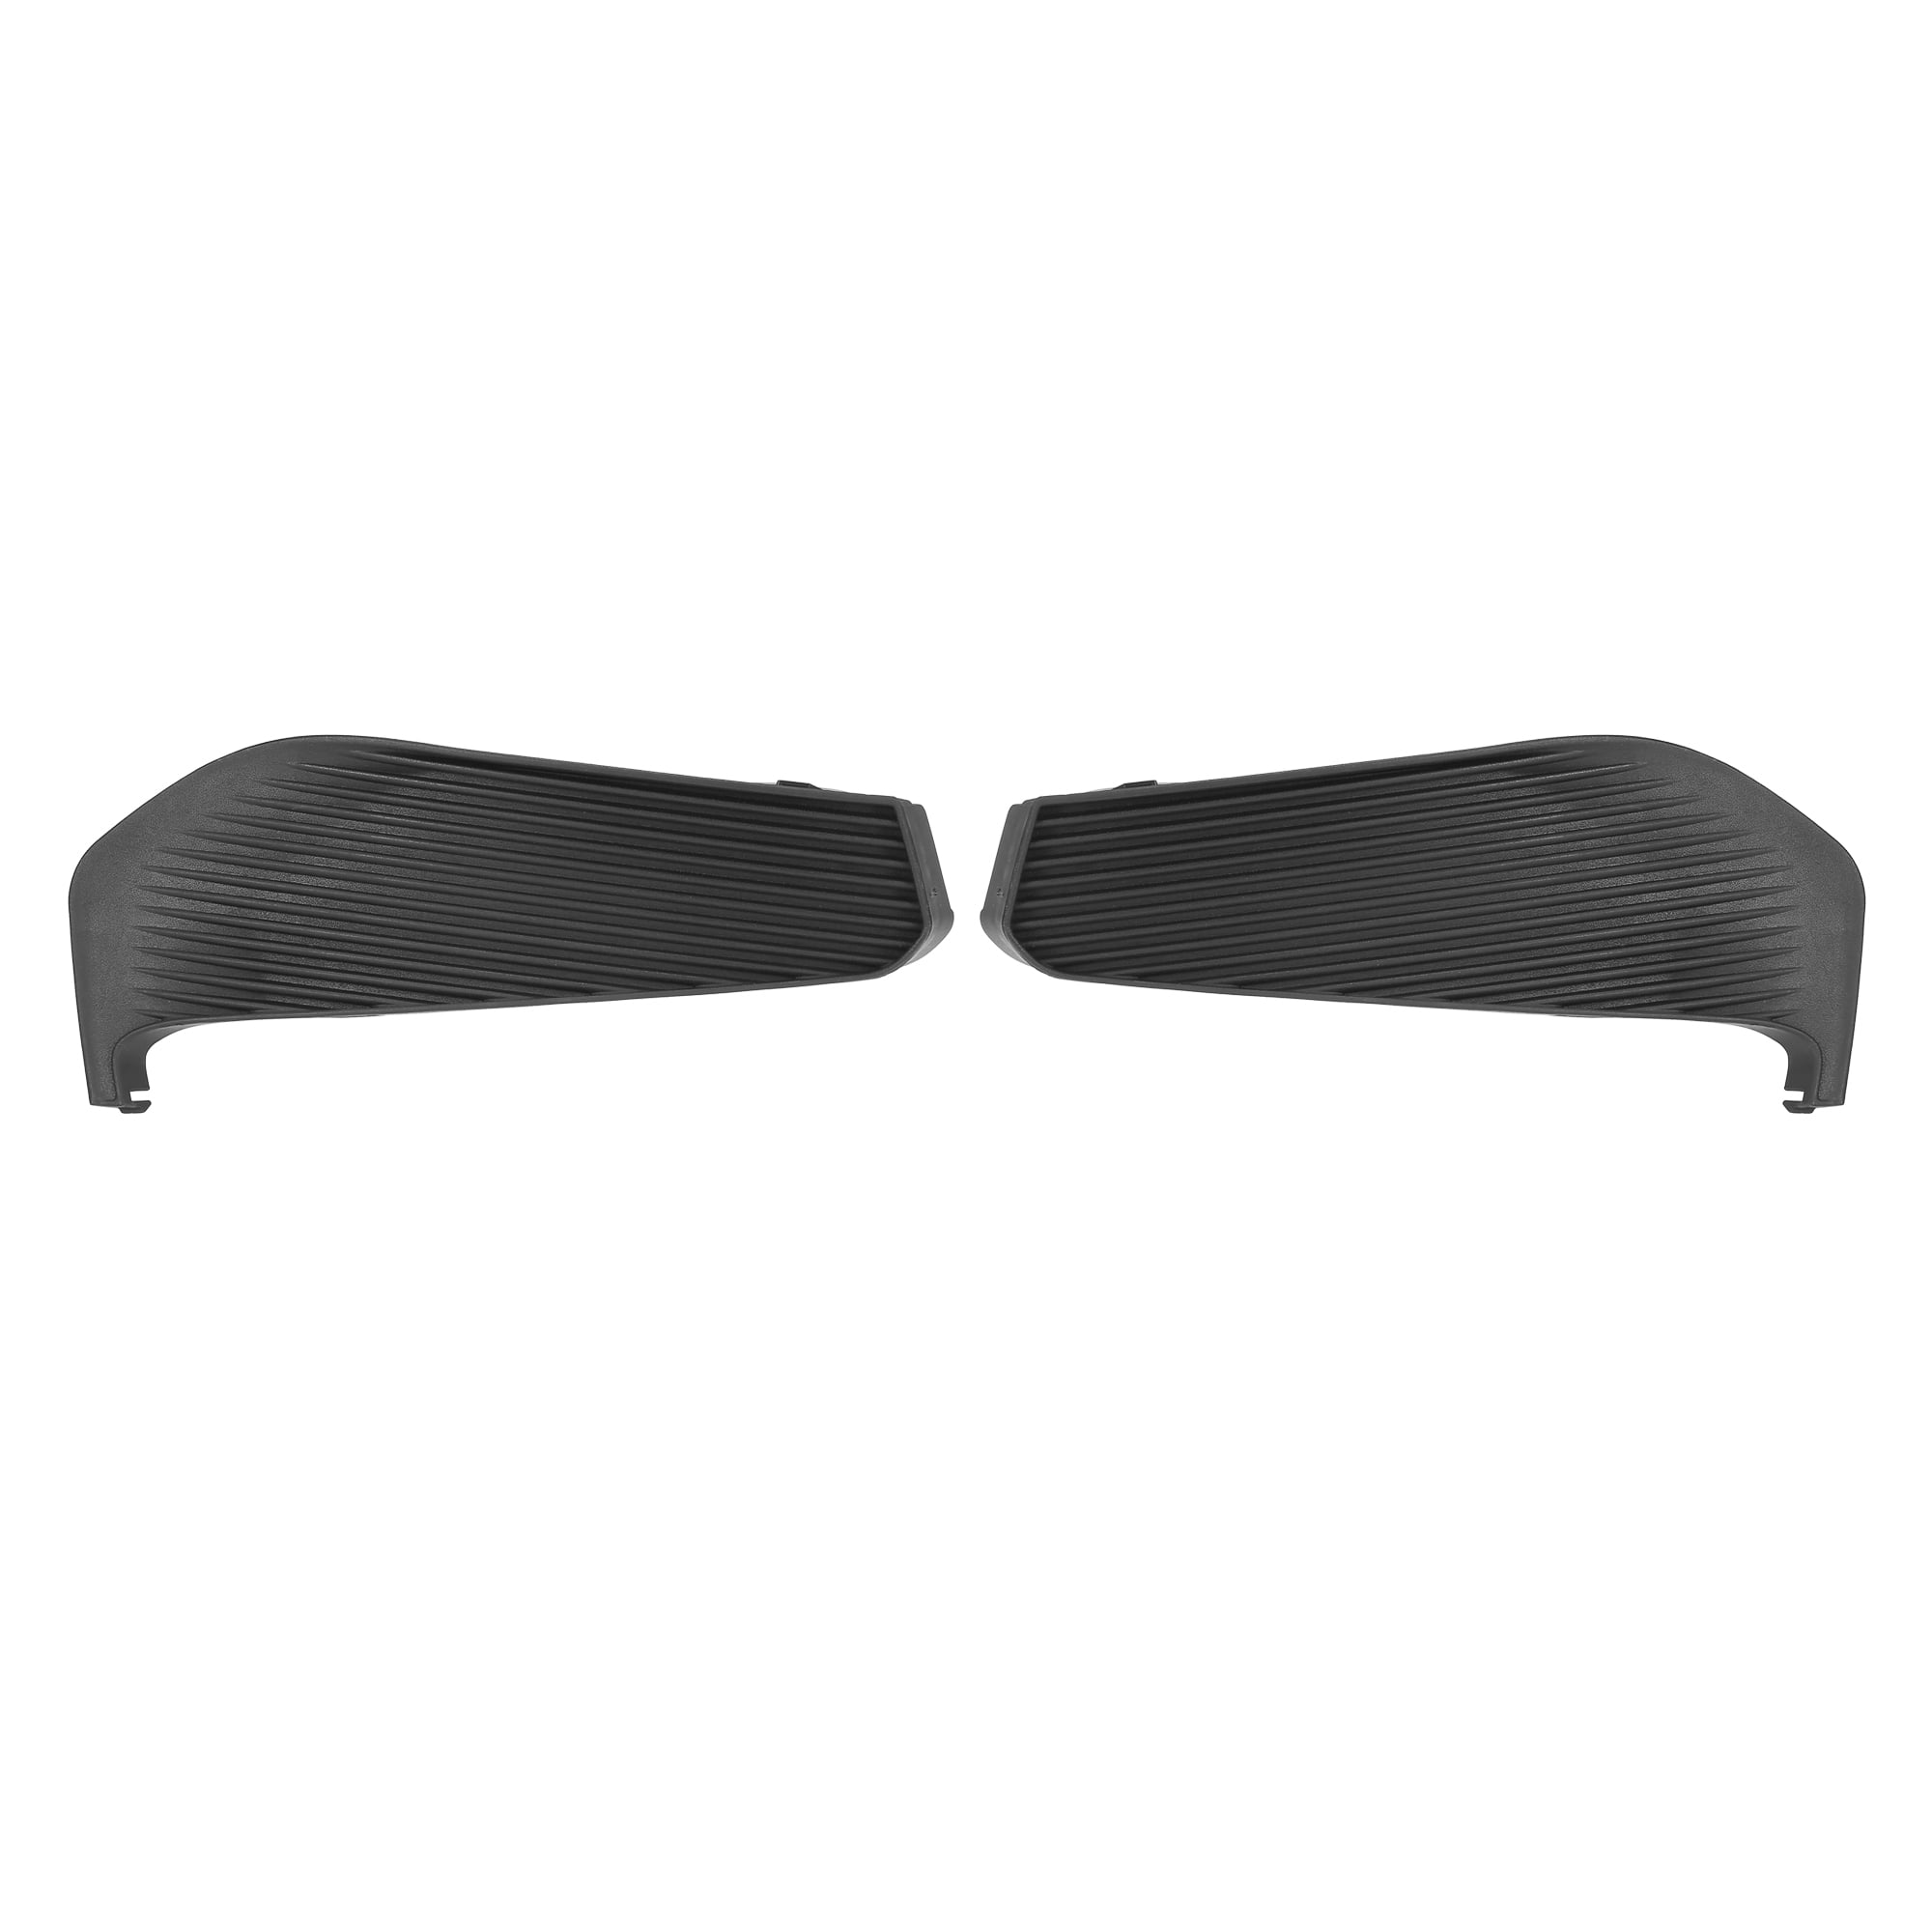 Black 23478393 Outer GM1038230 GM1039230 For Chevy Malibu Fog Light Cover 2016 2017 2018 Driver and Passenger Side Pair/Set 23478394 